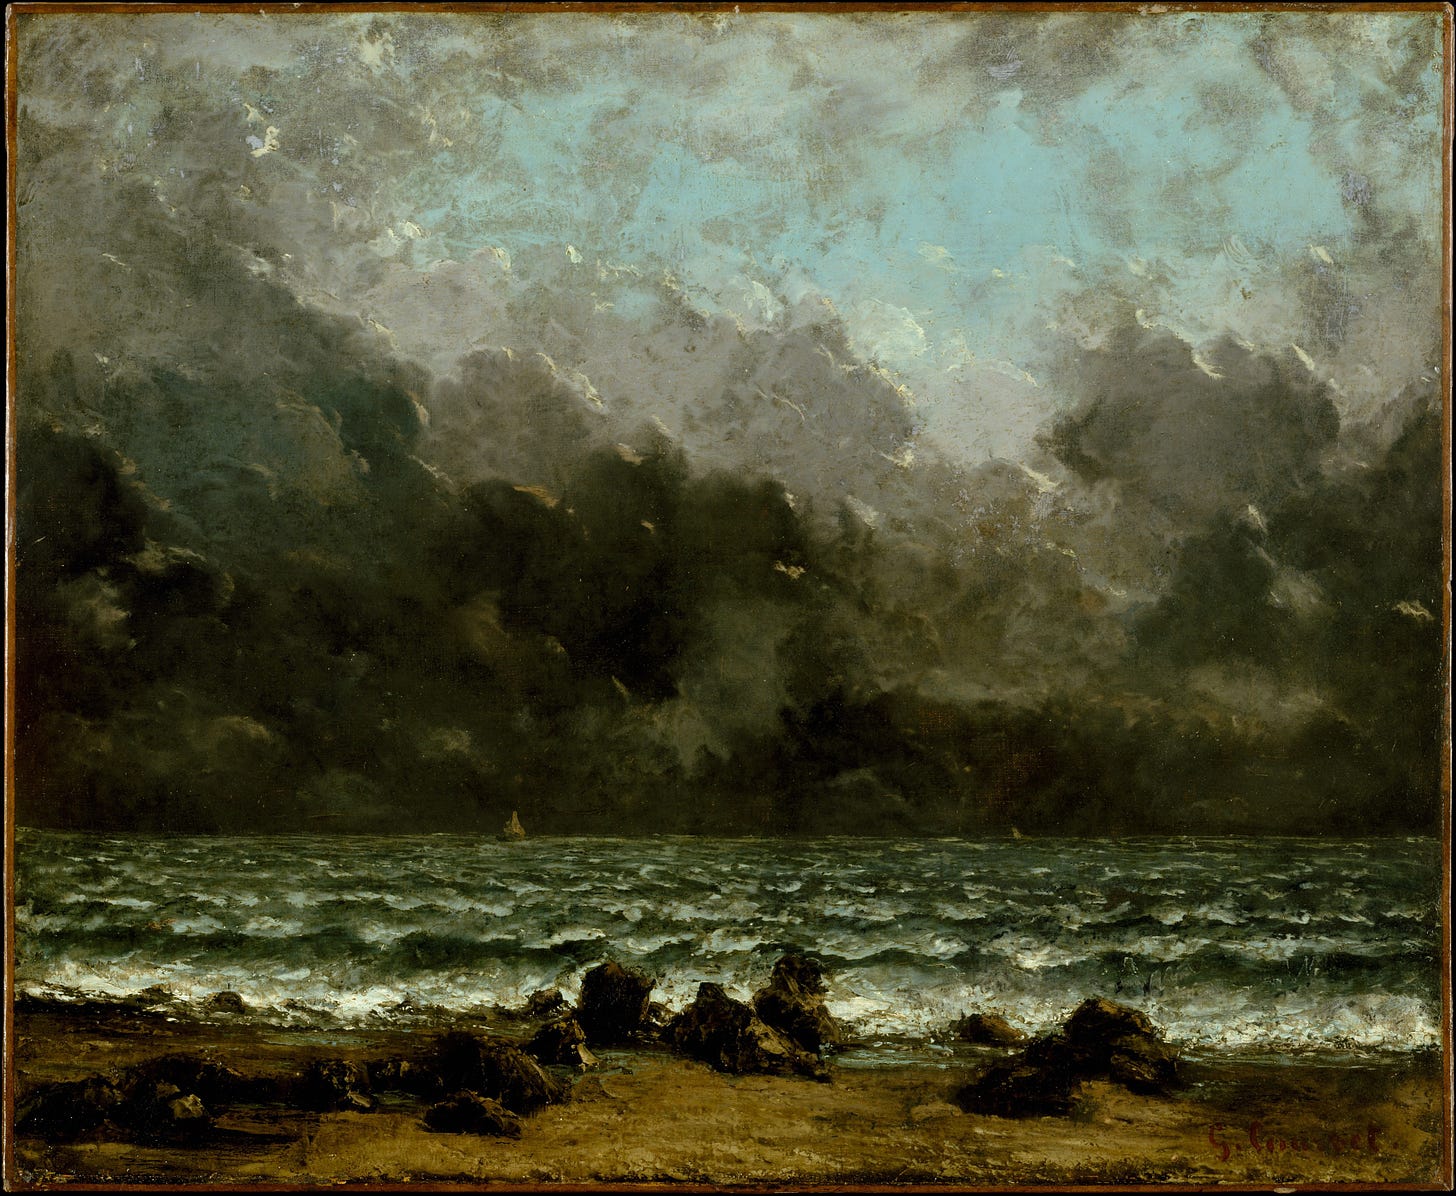 The Sea 1865 or later by Gustave Courbet.